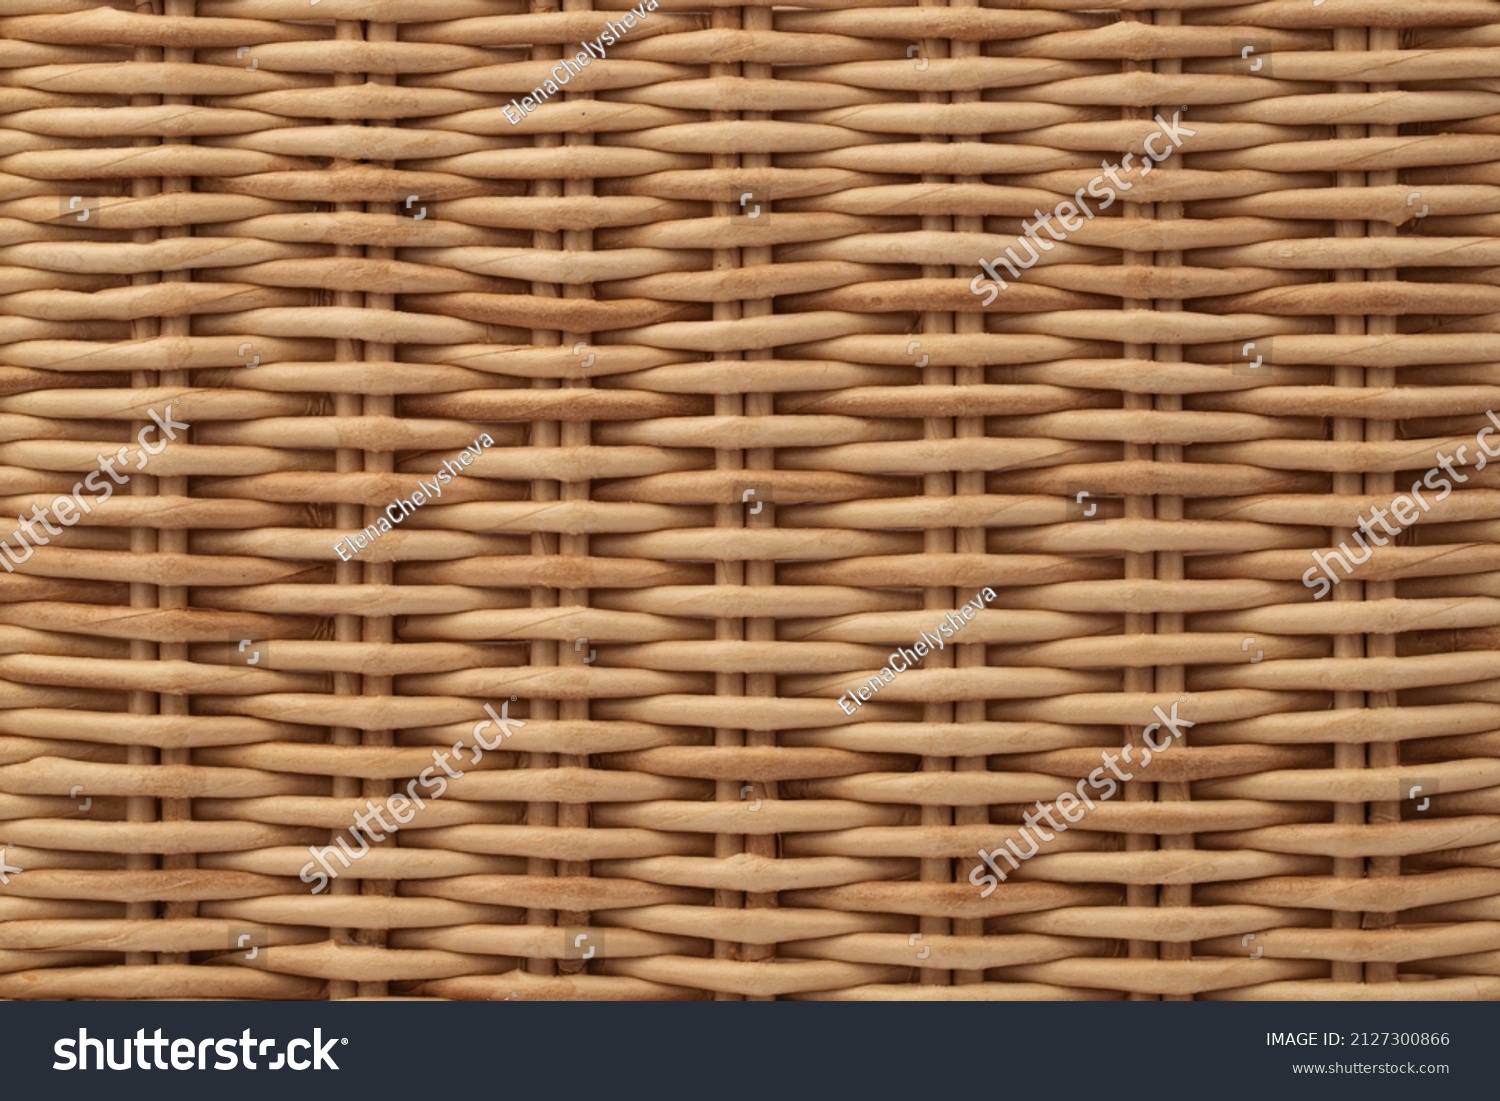 a fragment of a basket made of willow twigs or garden furniture, texture #2127300866